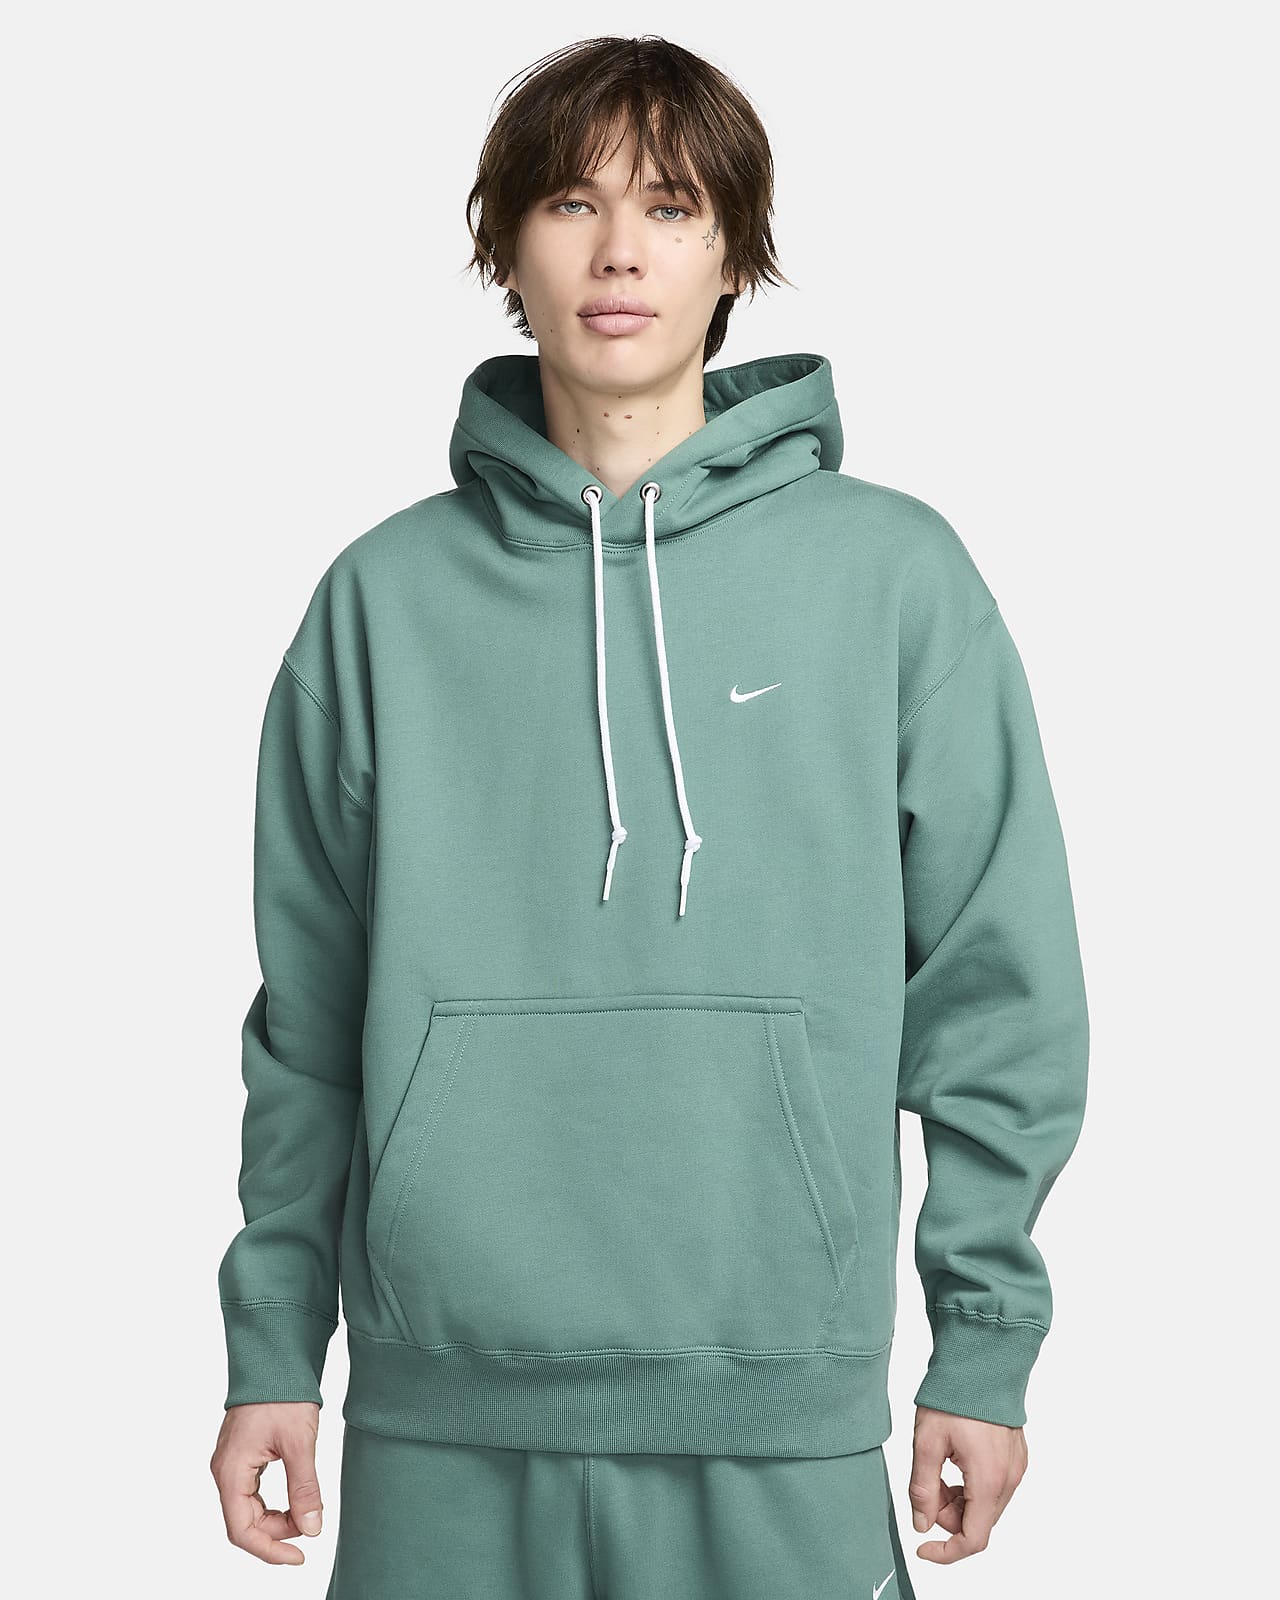 Nike mini swoosh extra oversized pullover hoodie in black and sail